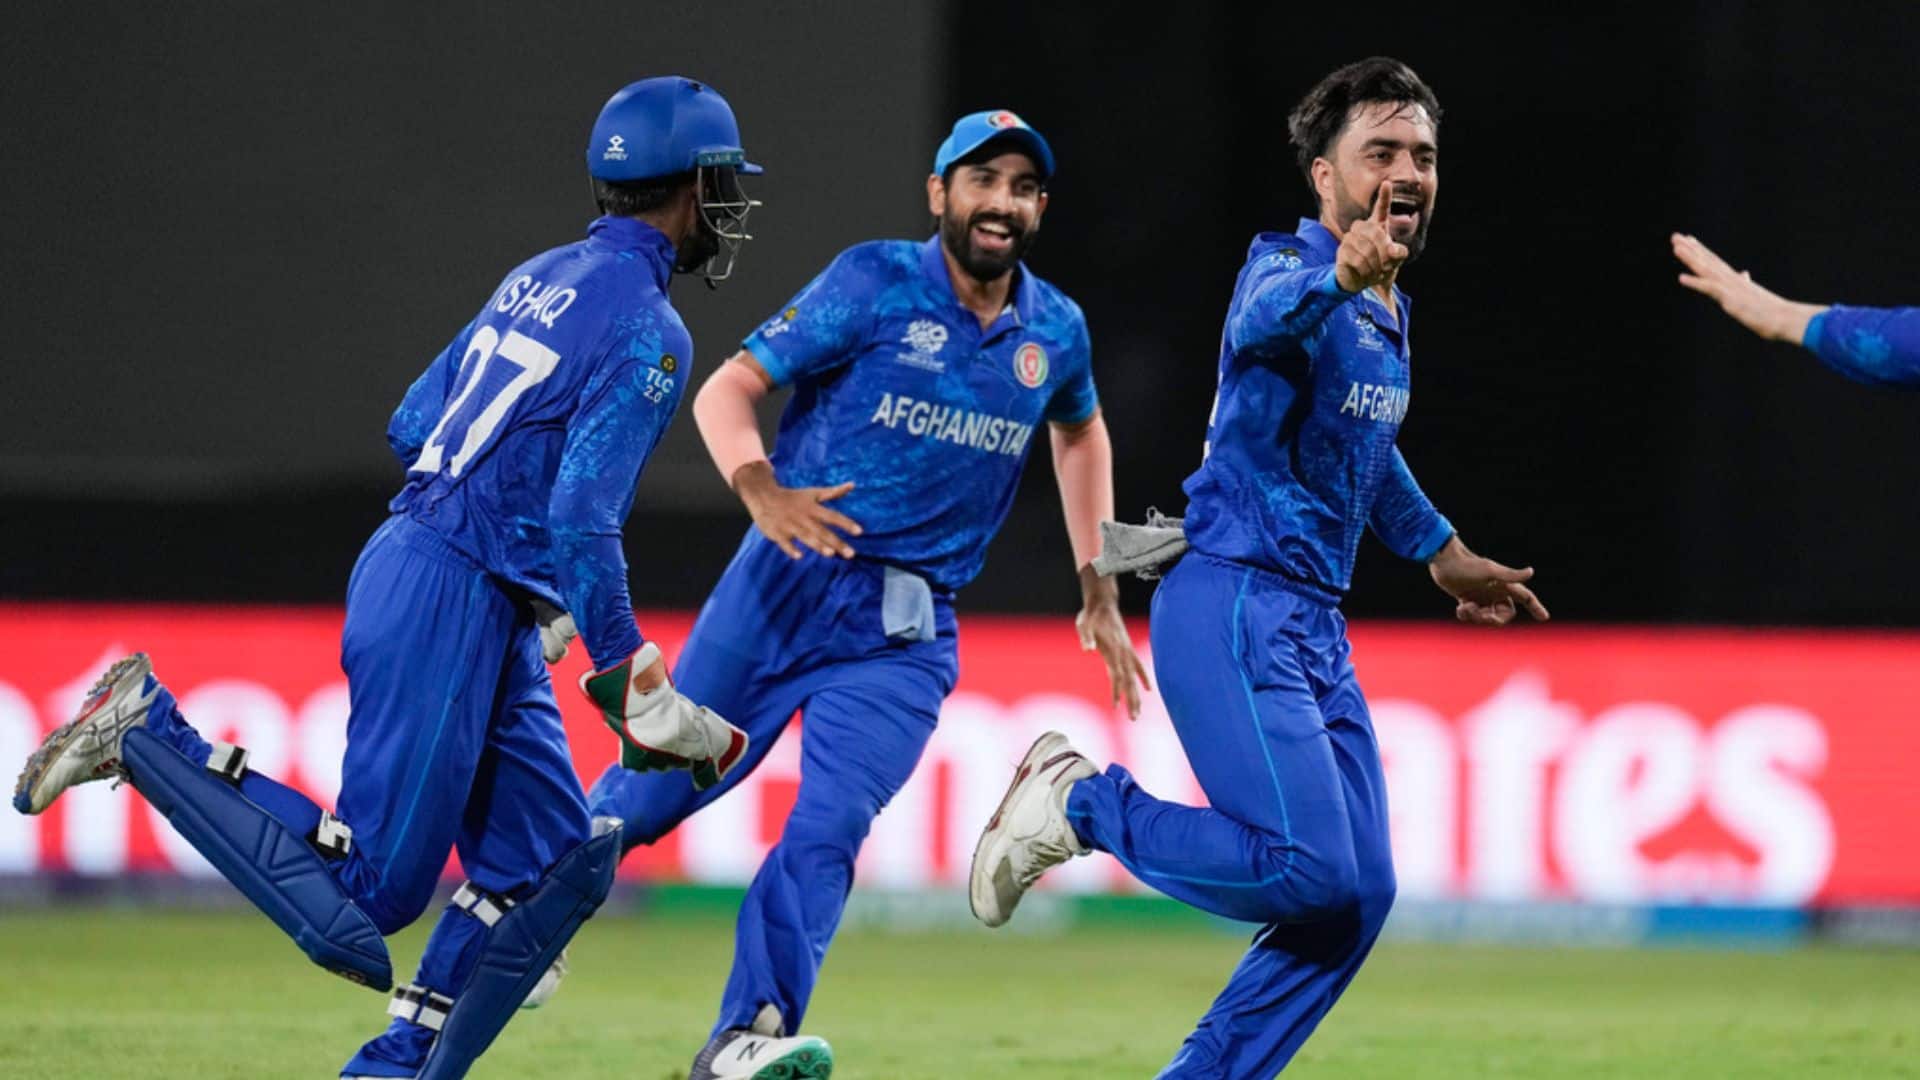 Rashid led AFG to their maiden semifinal outing in T20 WCs [AP]